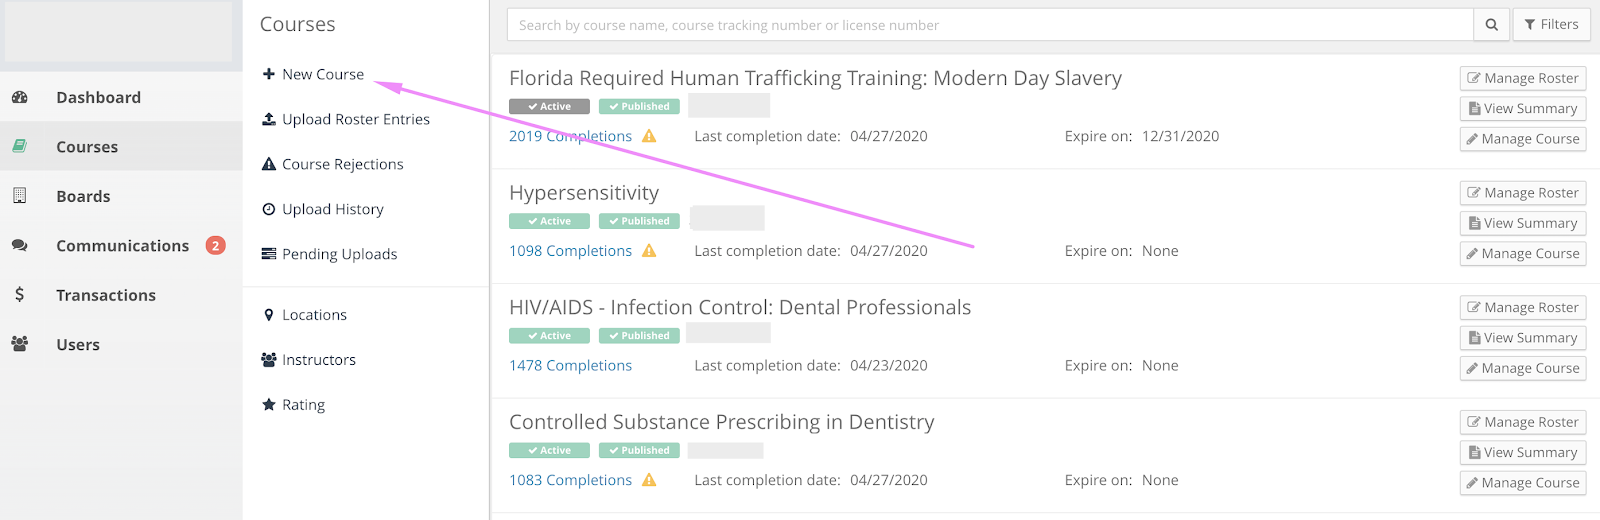 Screenshot of the provider course list page with an arrow pointing to the New Course link.